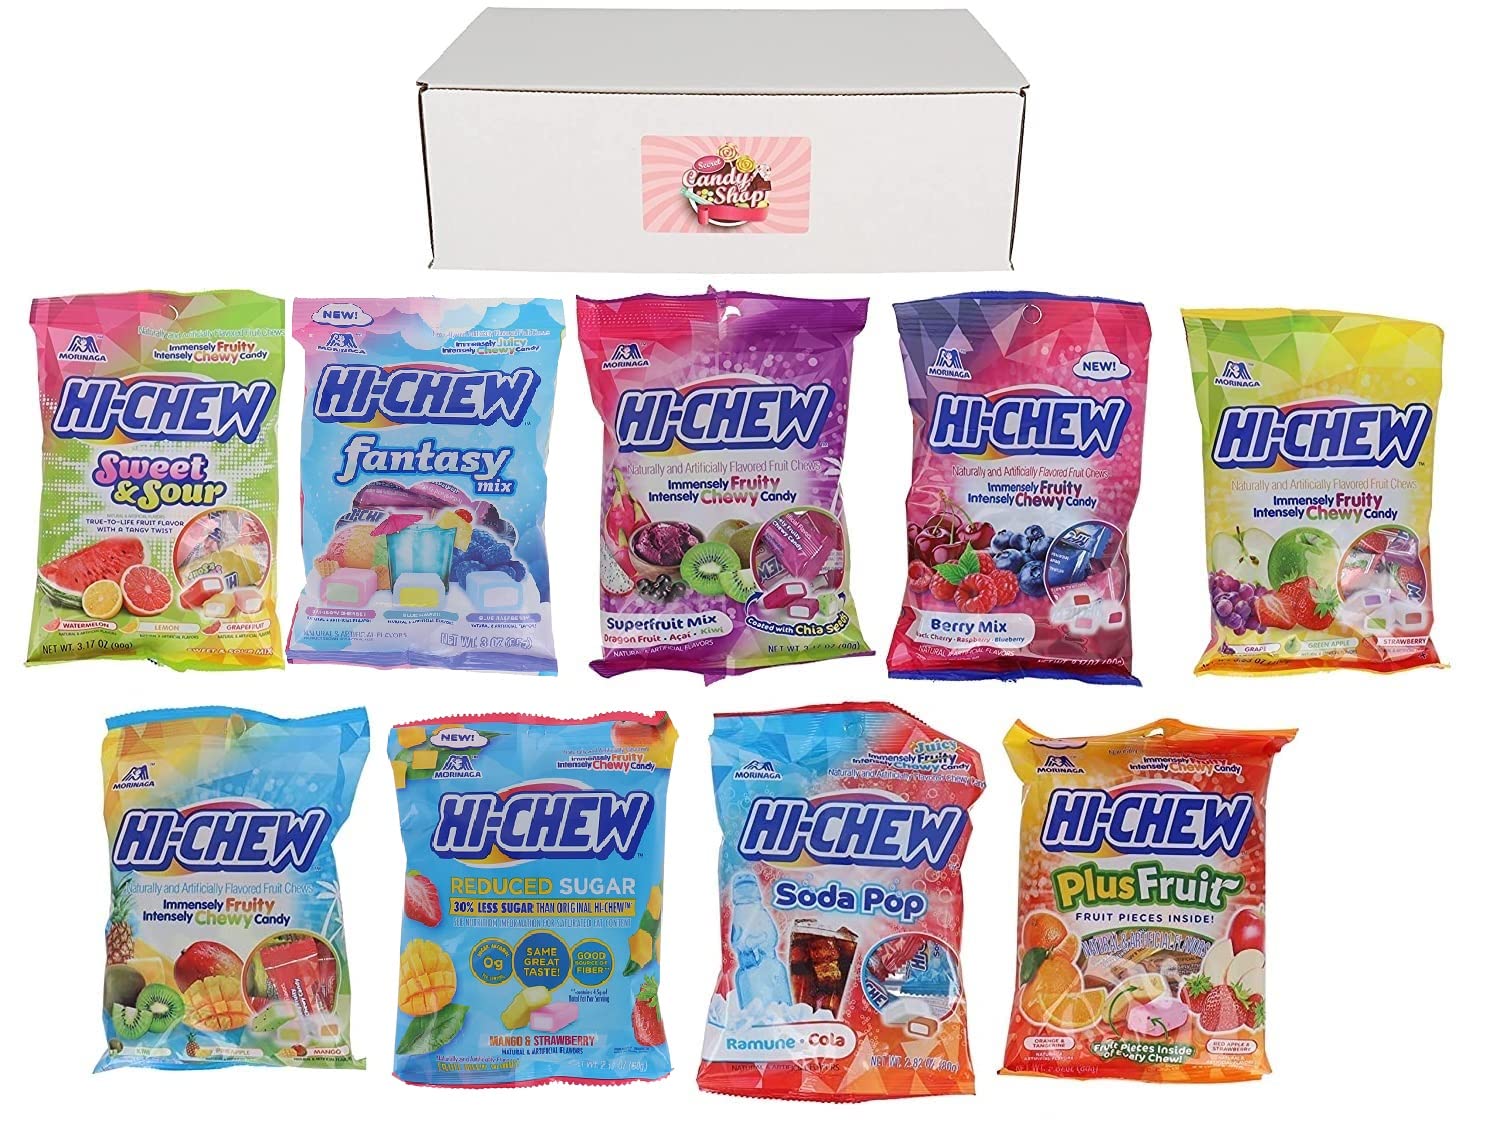 Hi-Chew Chewy Fruit Candy Variety Pack of 9 Bags (1 of each, Total of 9)